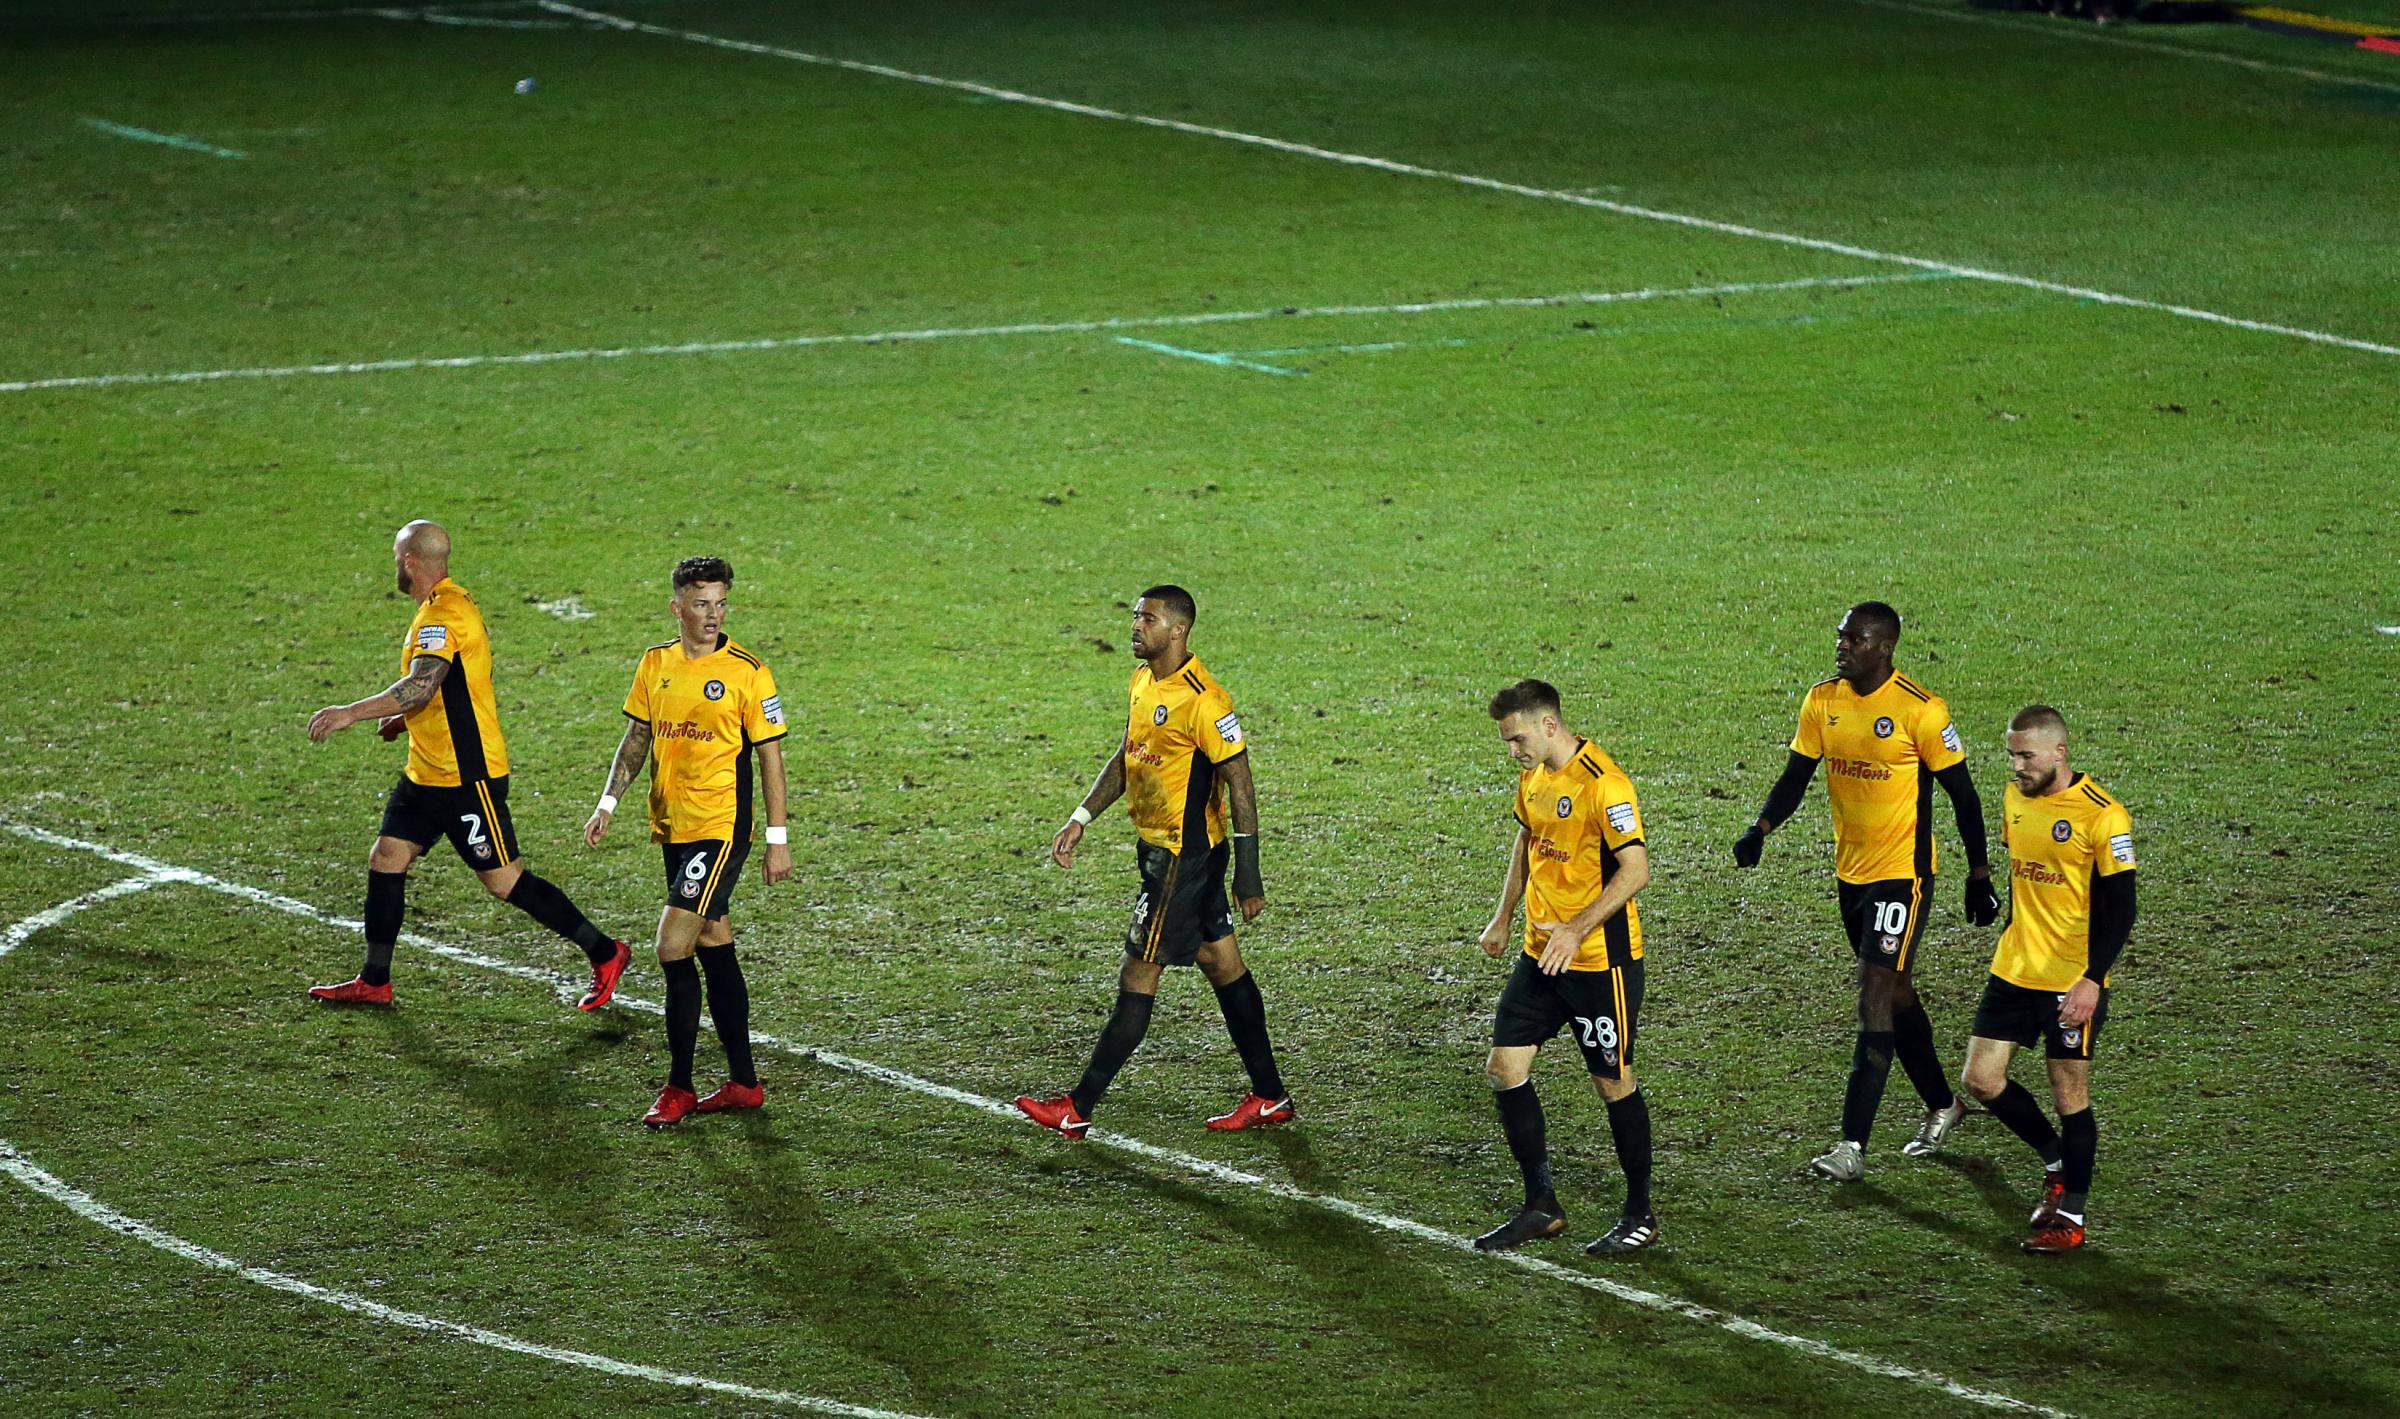 ANDREW PENMAN: Forget Wembley, Sincil Bank is the real test of Newport County's mettle